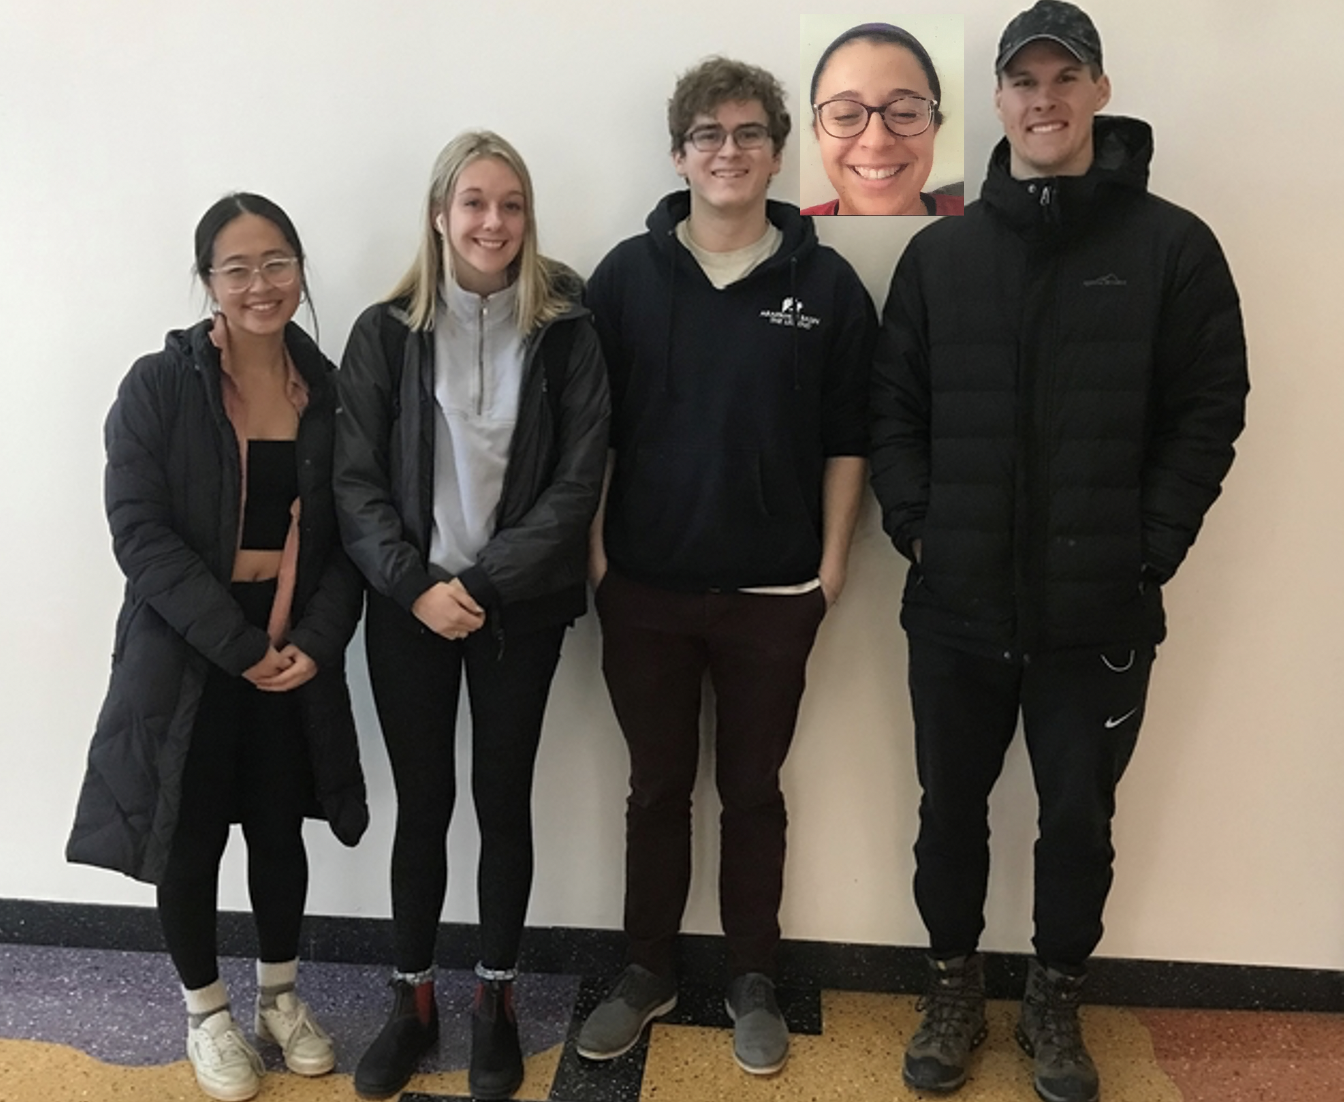 From Left to Right: Jessica Wang (Communicator), Abby Drake (BWIG), Mark Hutson (Team Leader), Isabel Erickson (BSAC), and Preston Lewis (BPAG)